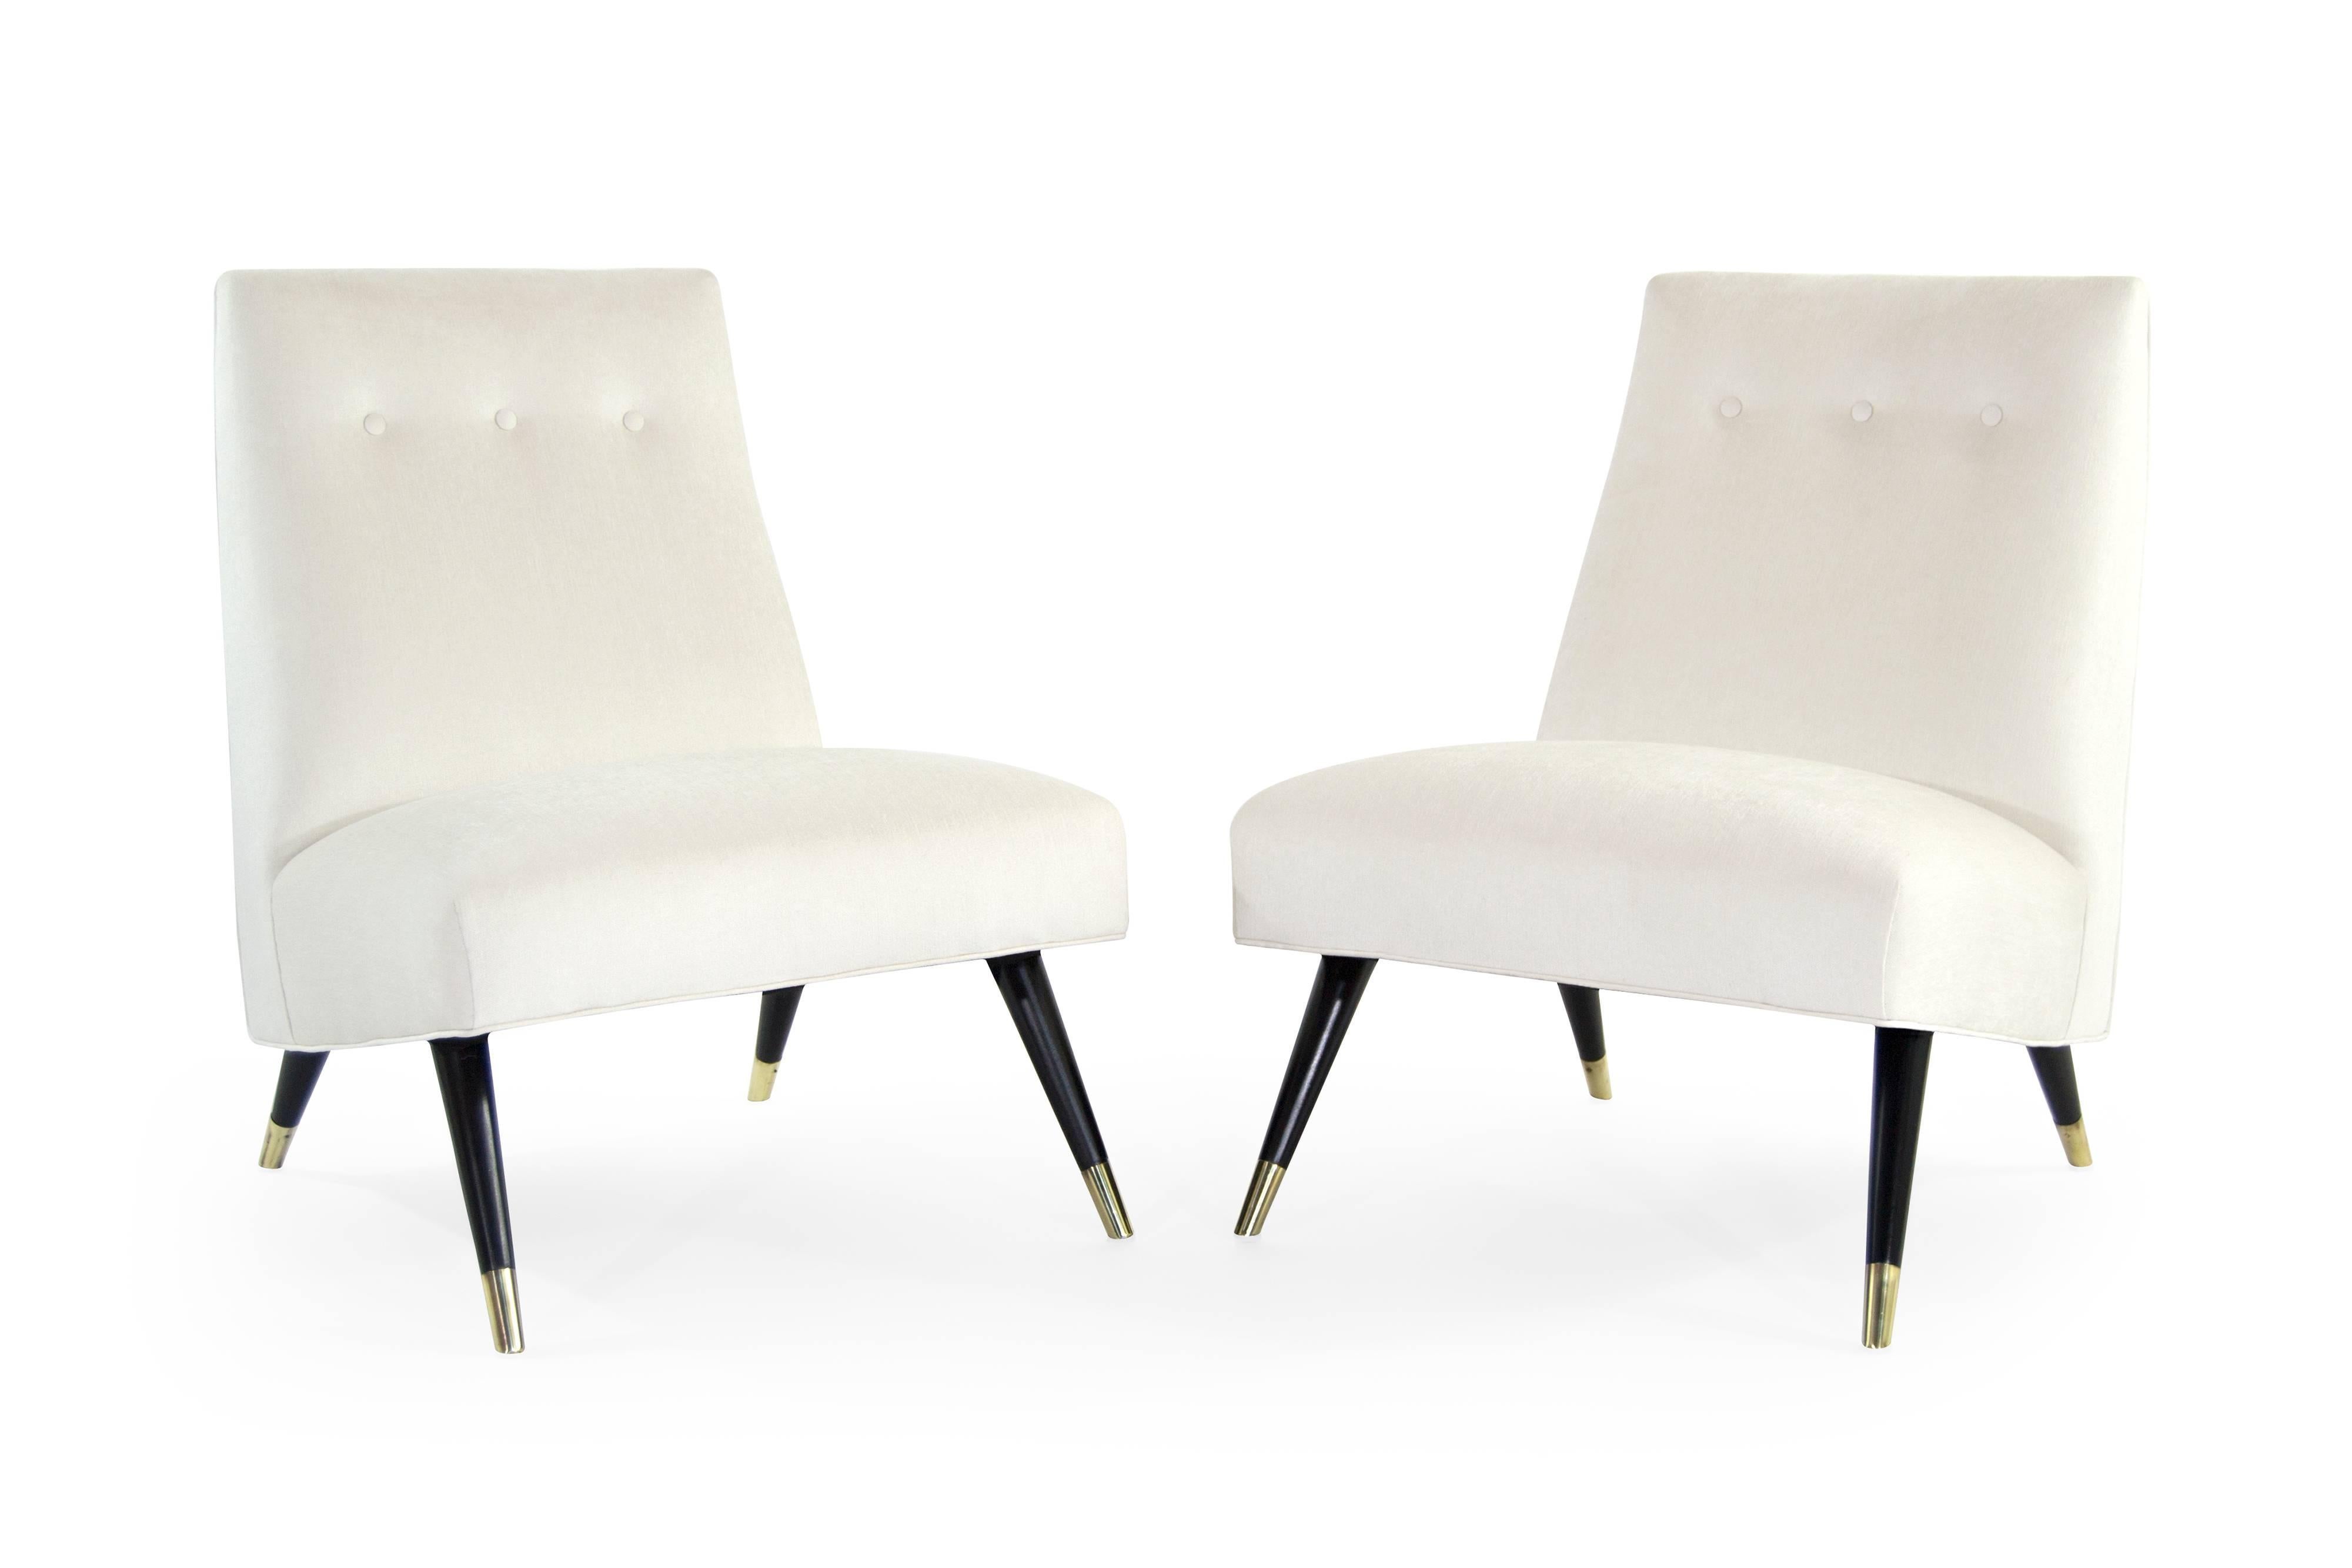 Pair of low profile lounge chairs by Karpen of California, circa 1950s. Newly upholstered in ivory cotton linen by Kravet. Legs fully restored to its original ebonized finish. Brass sabots newly polished.